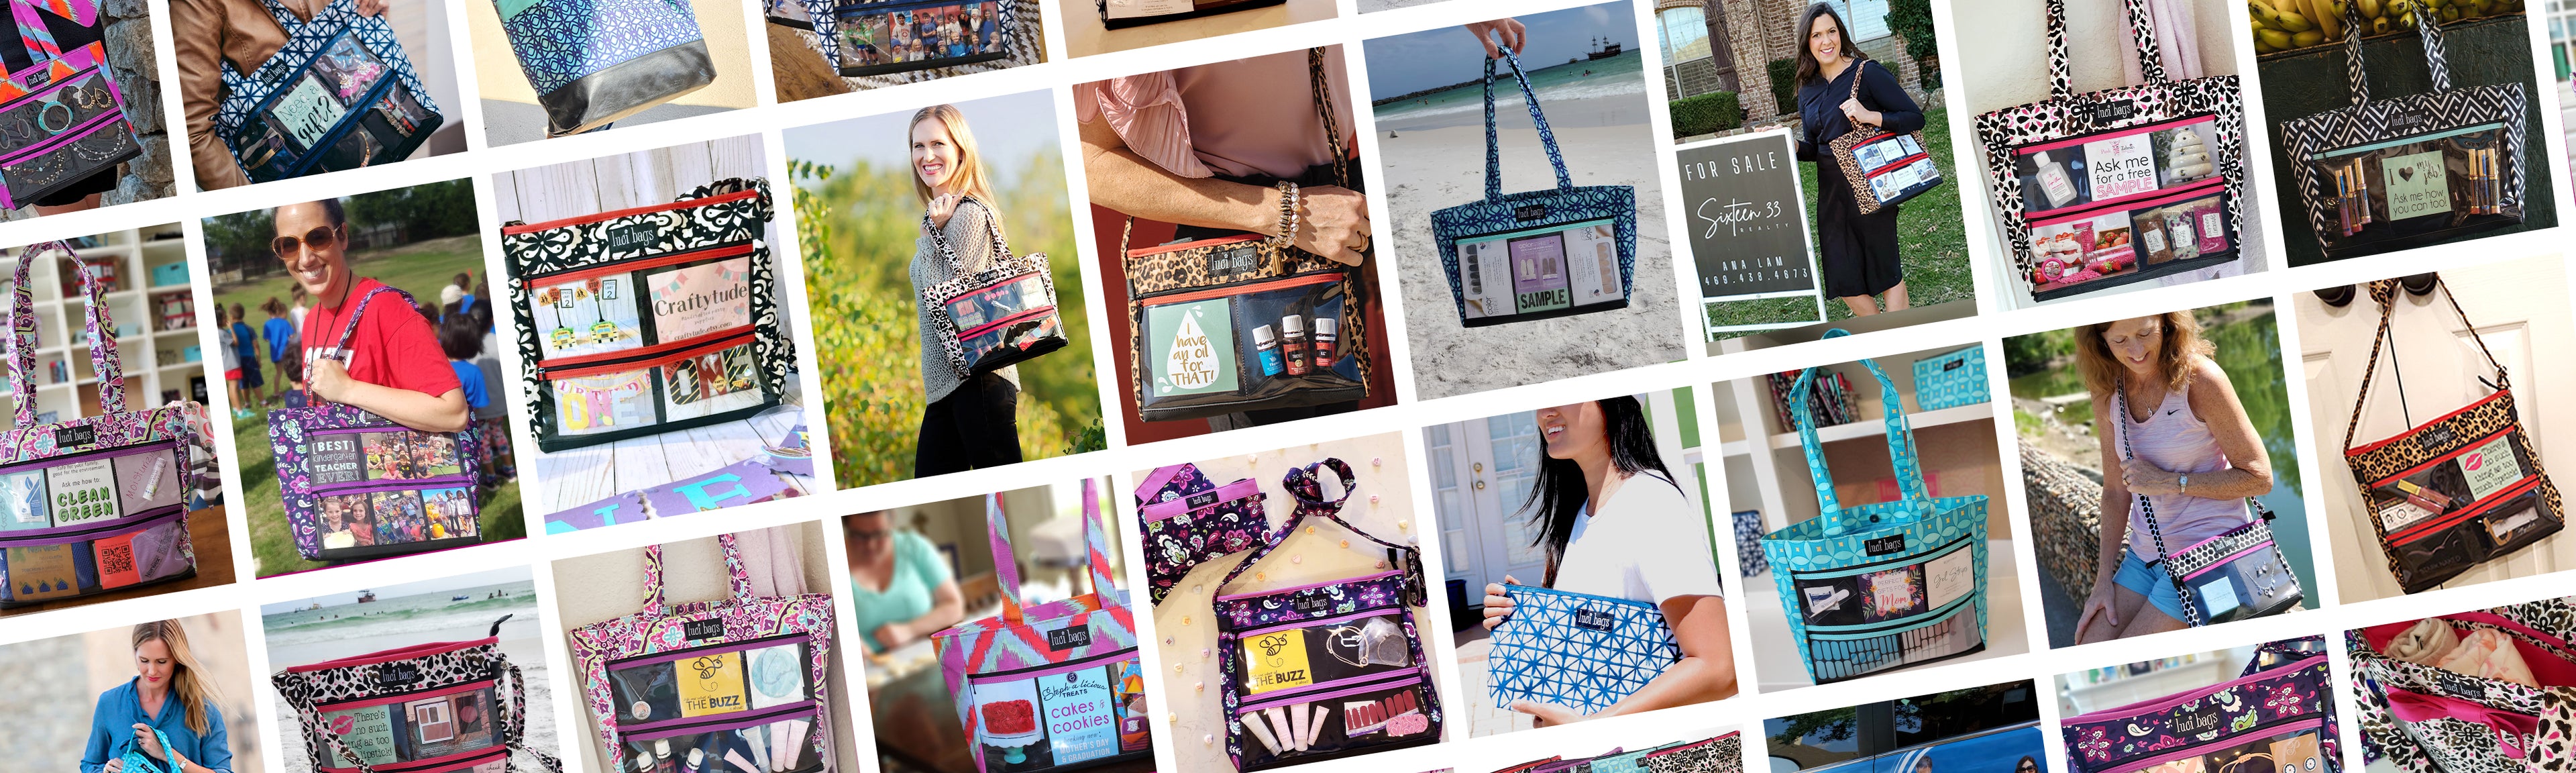 Photo album showing various sizes and styles of Luci Bags filled with photos and goods.